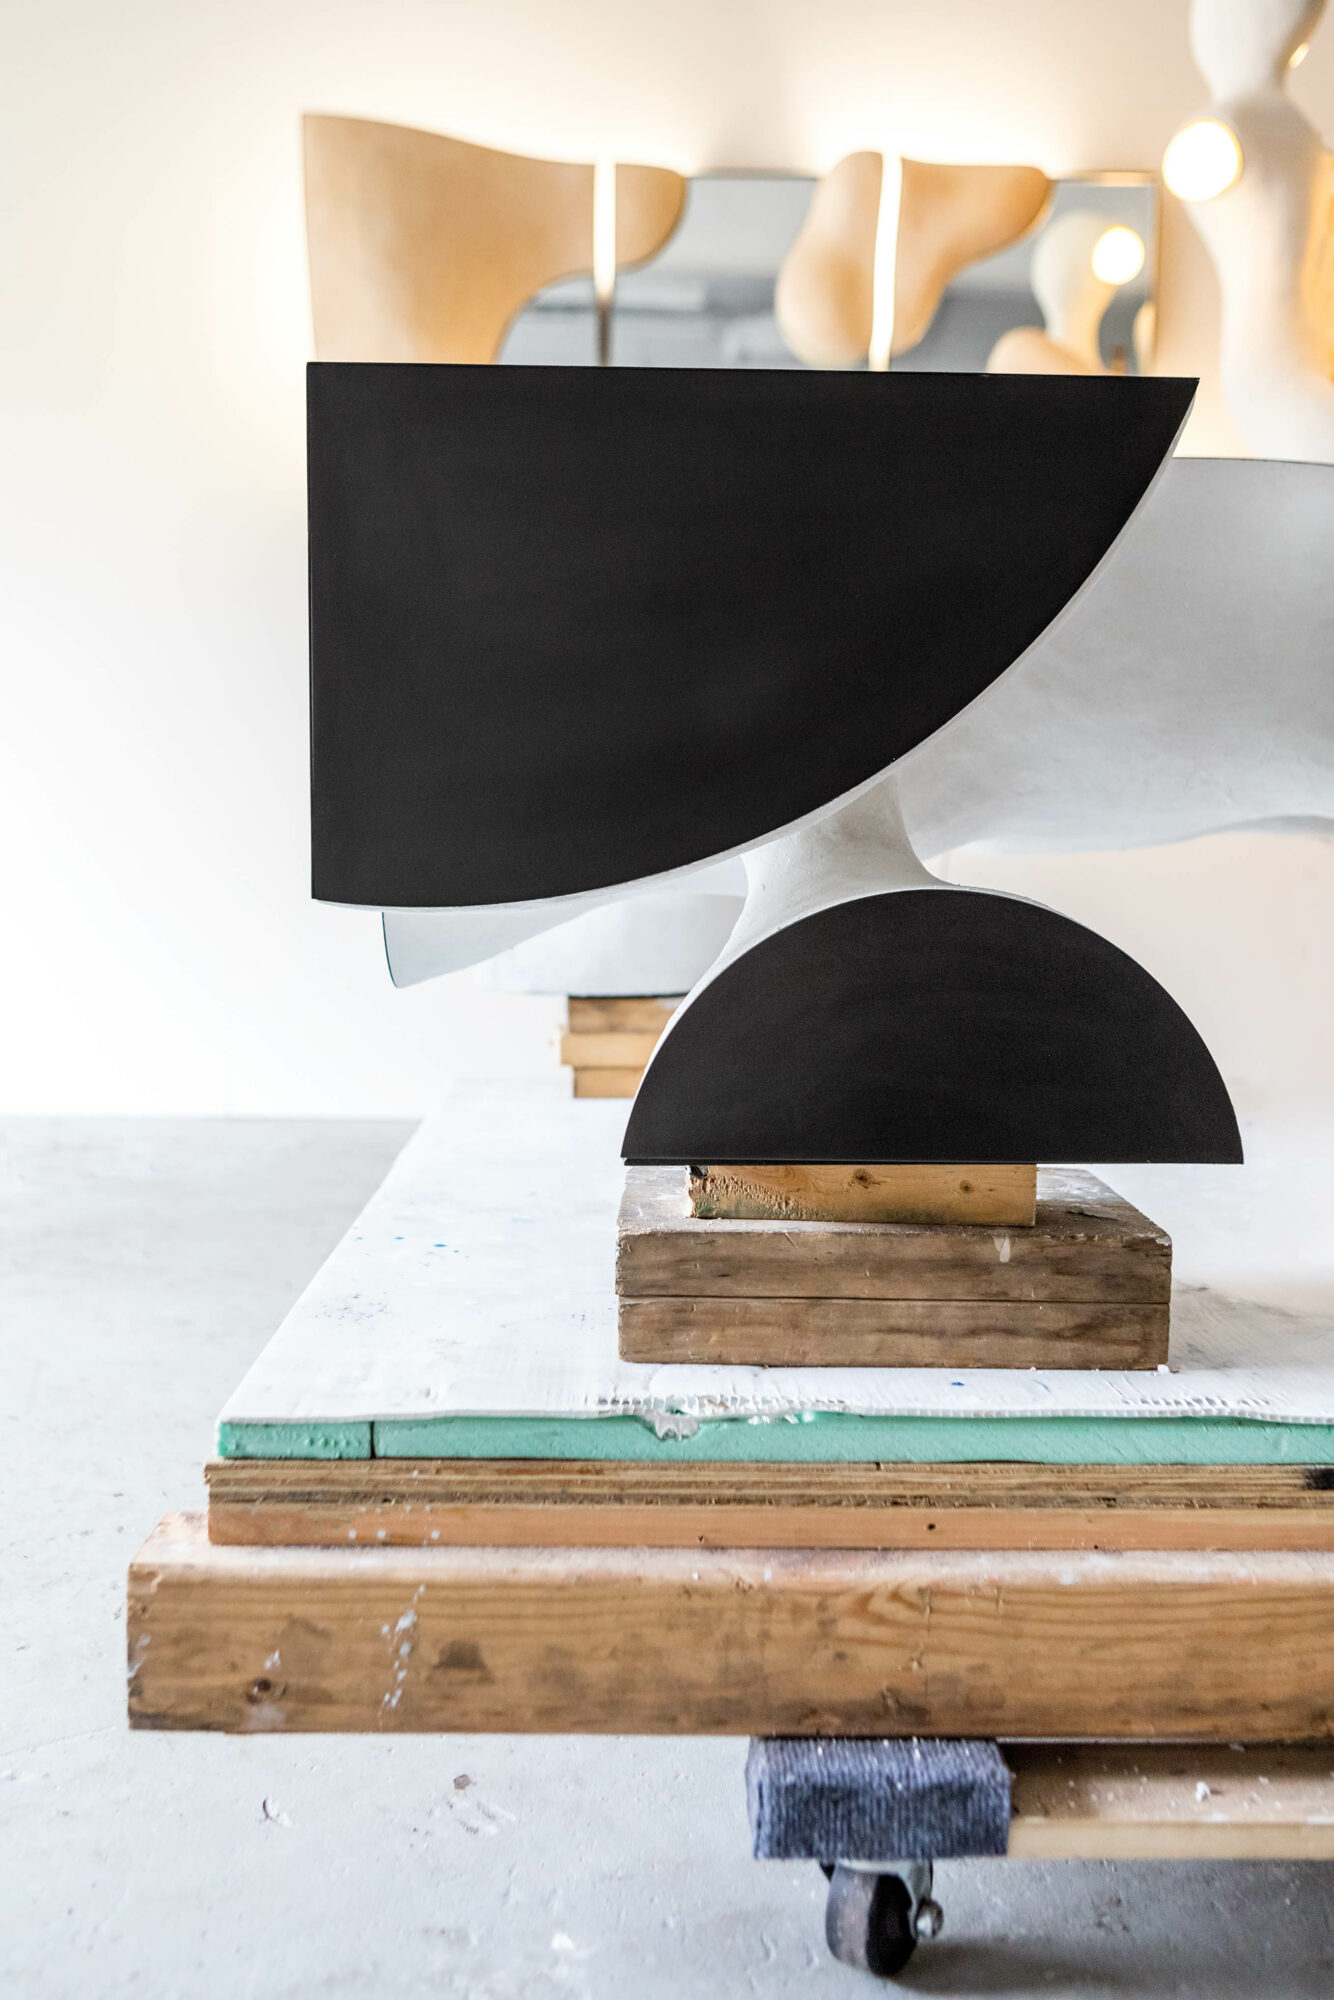 black ovular sculptures on white wooden planks by J McDonald